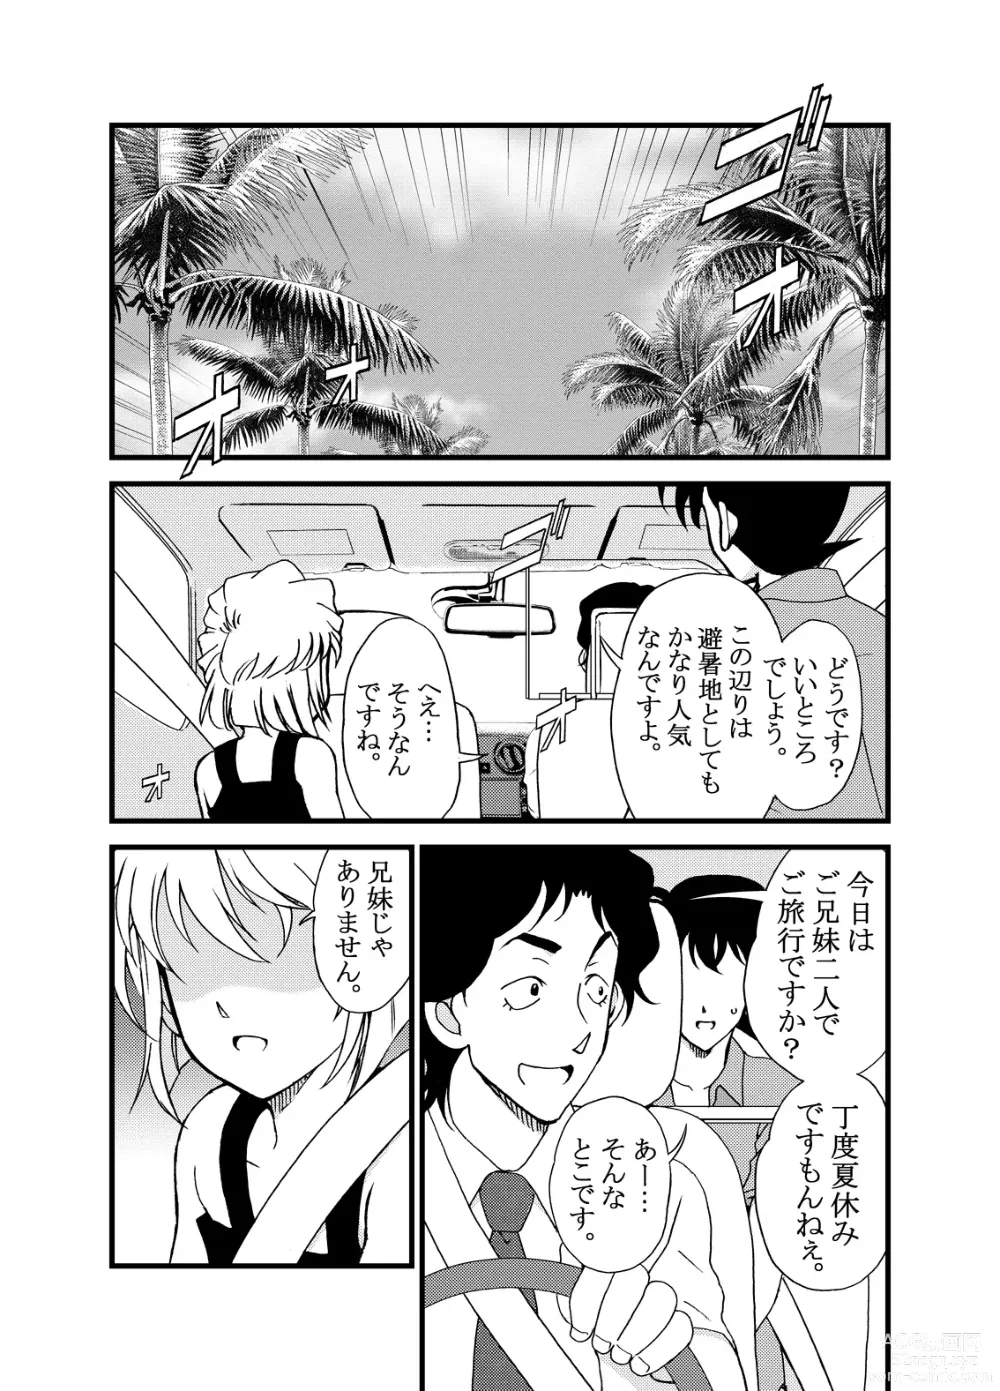 Page 4 of doujinshi Summer Resort Preview